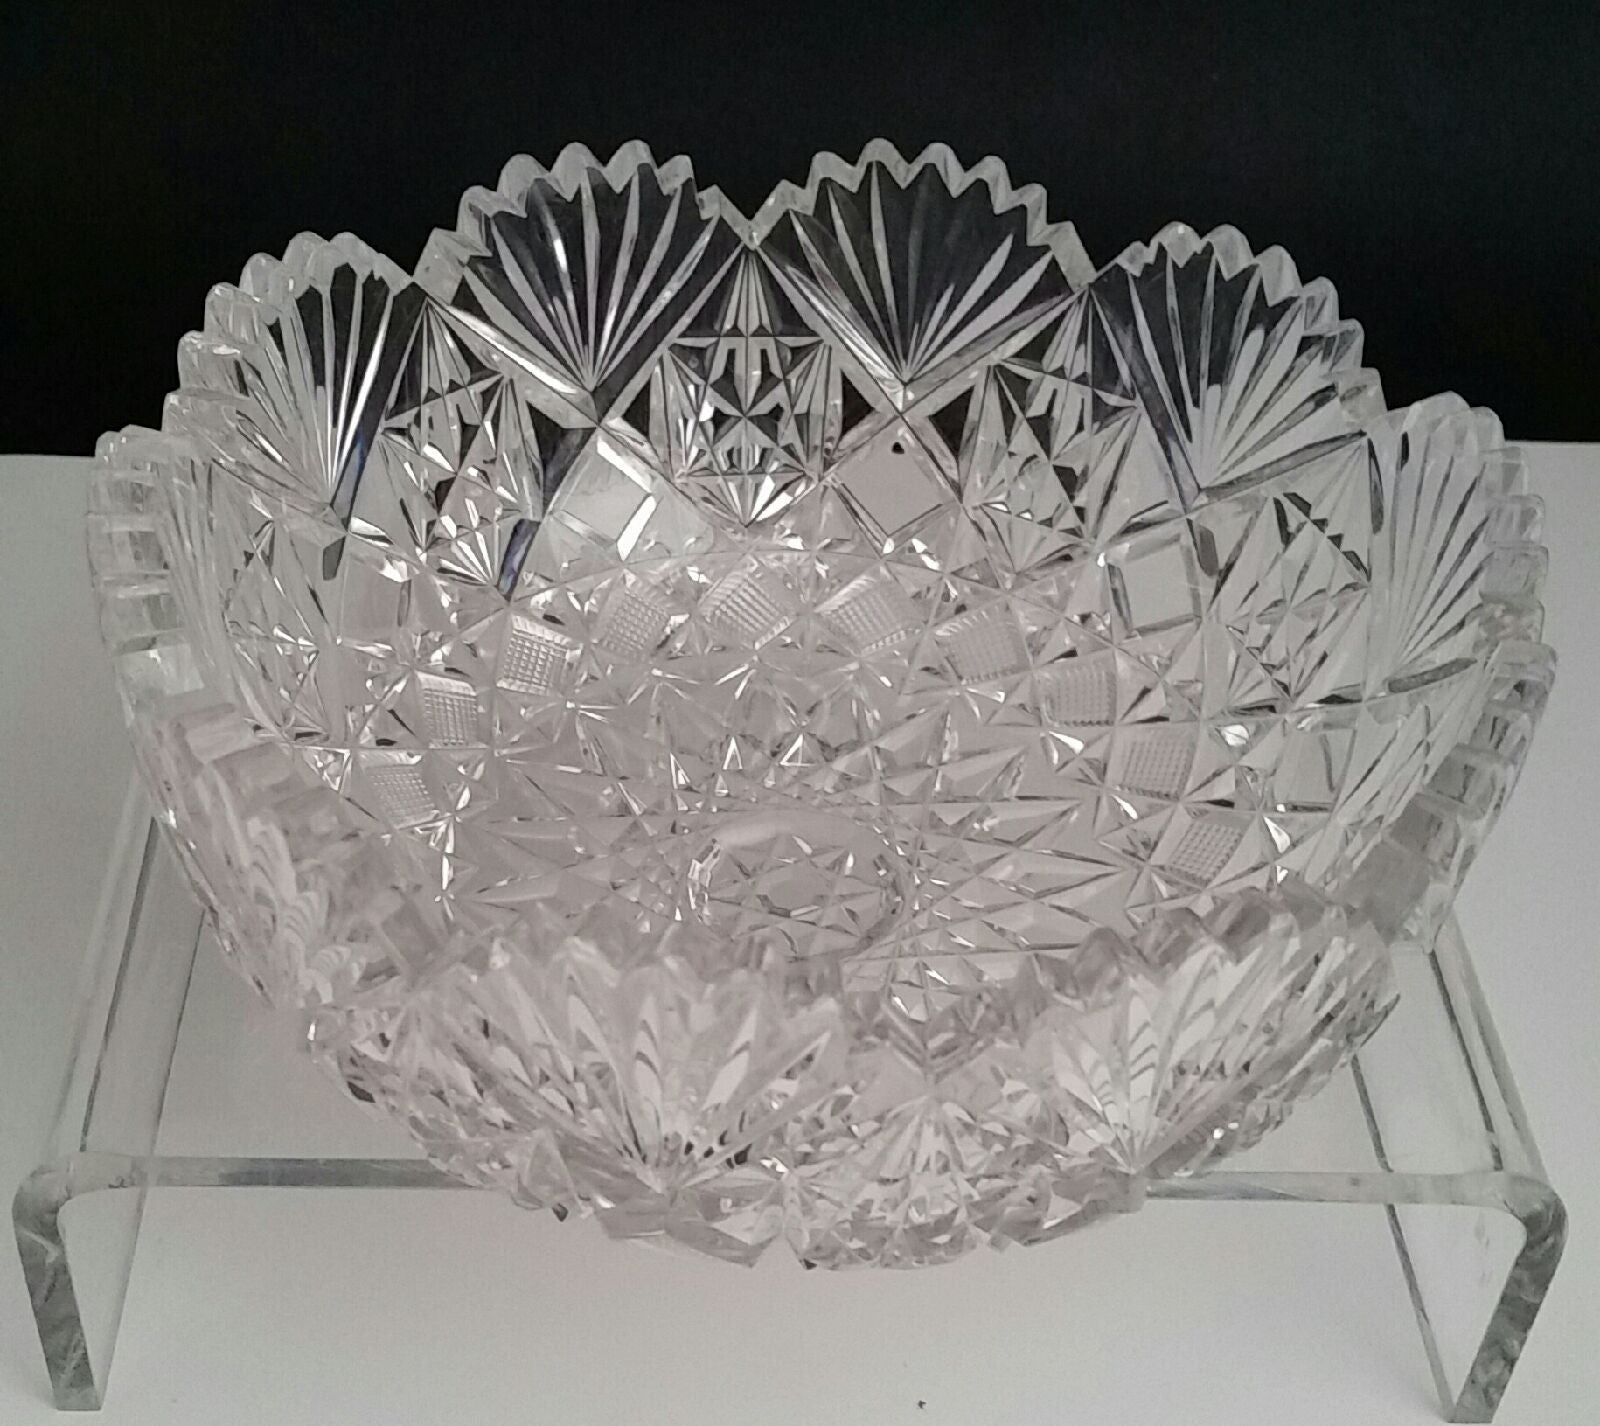 Cut glass ABP bowl blown blank Antique - O'Rourke crystal awards & gifts abp cut glass